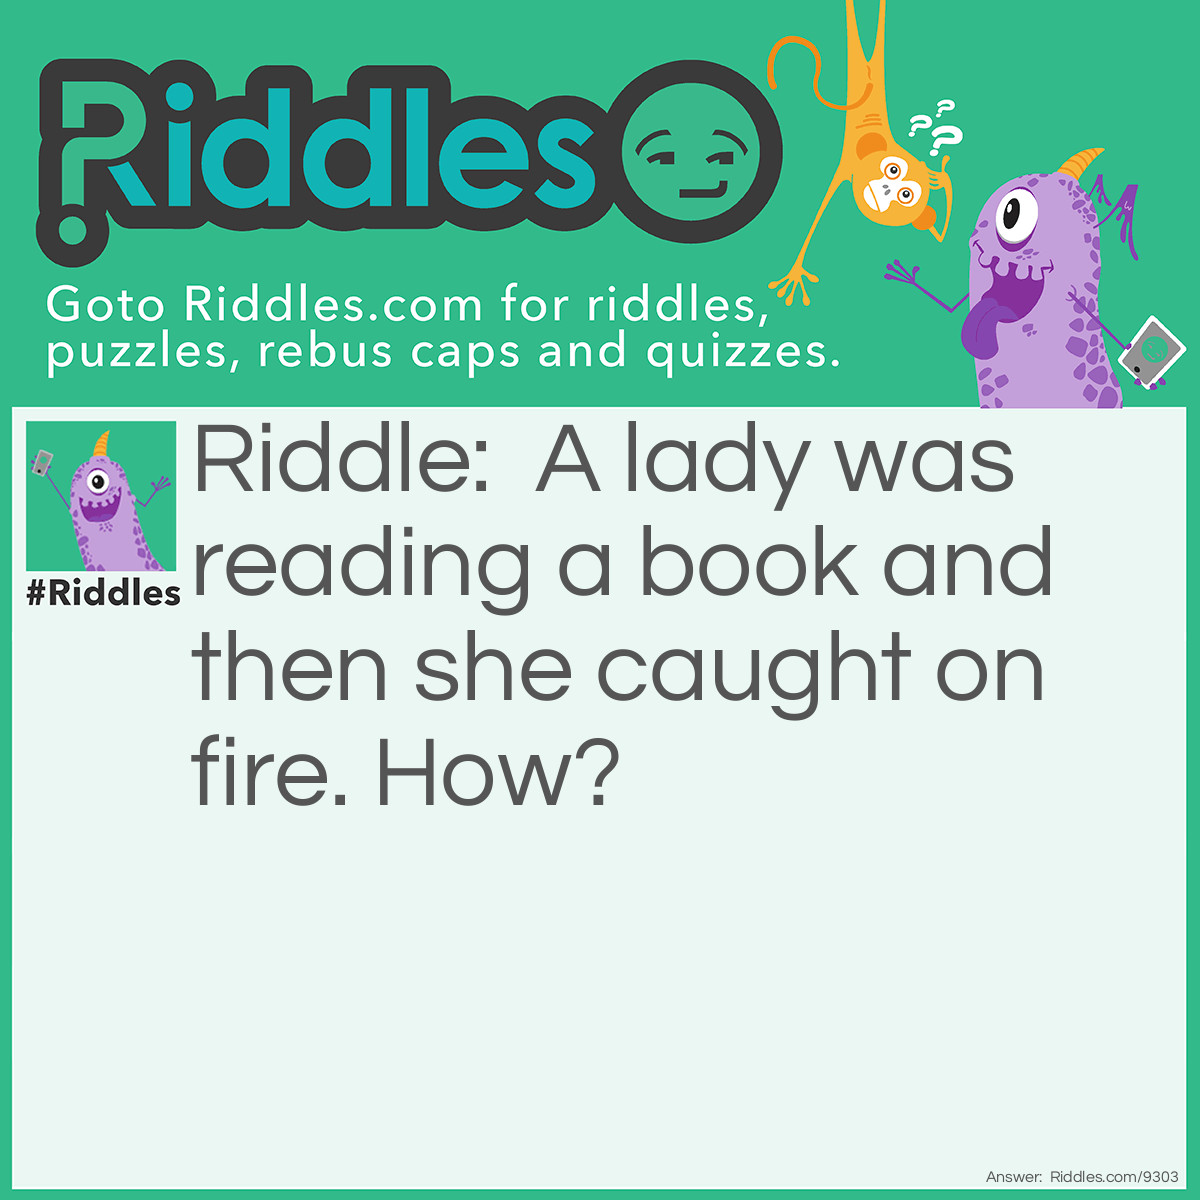 Riddle: A lady was reading a book and then she caught on fire. How? Answer: She was sitting by a window and the sun came through the window and reflected off a mirror, causing her to catch fire(her clothes).